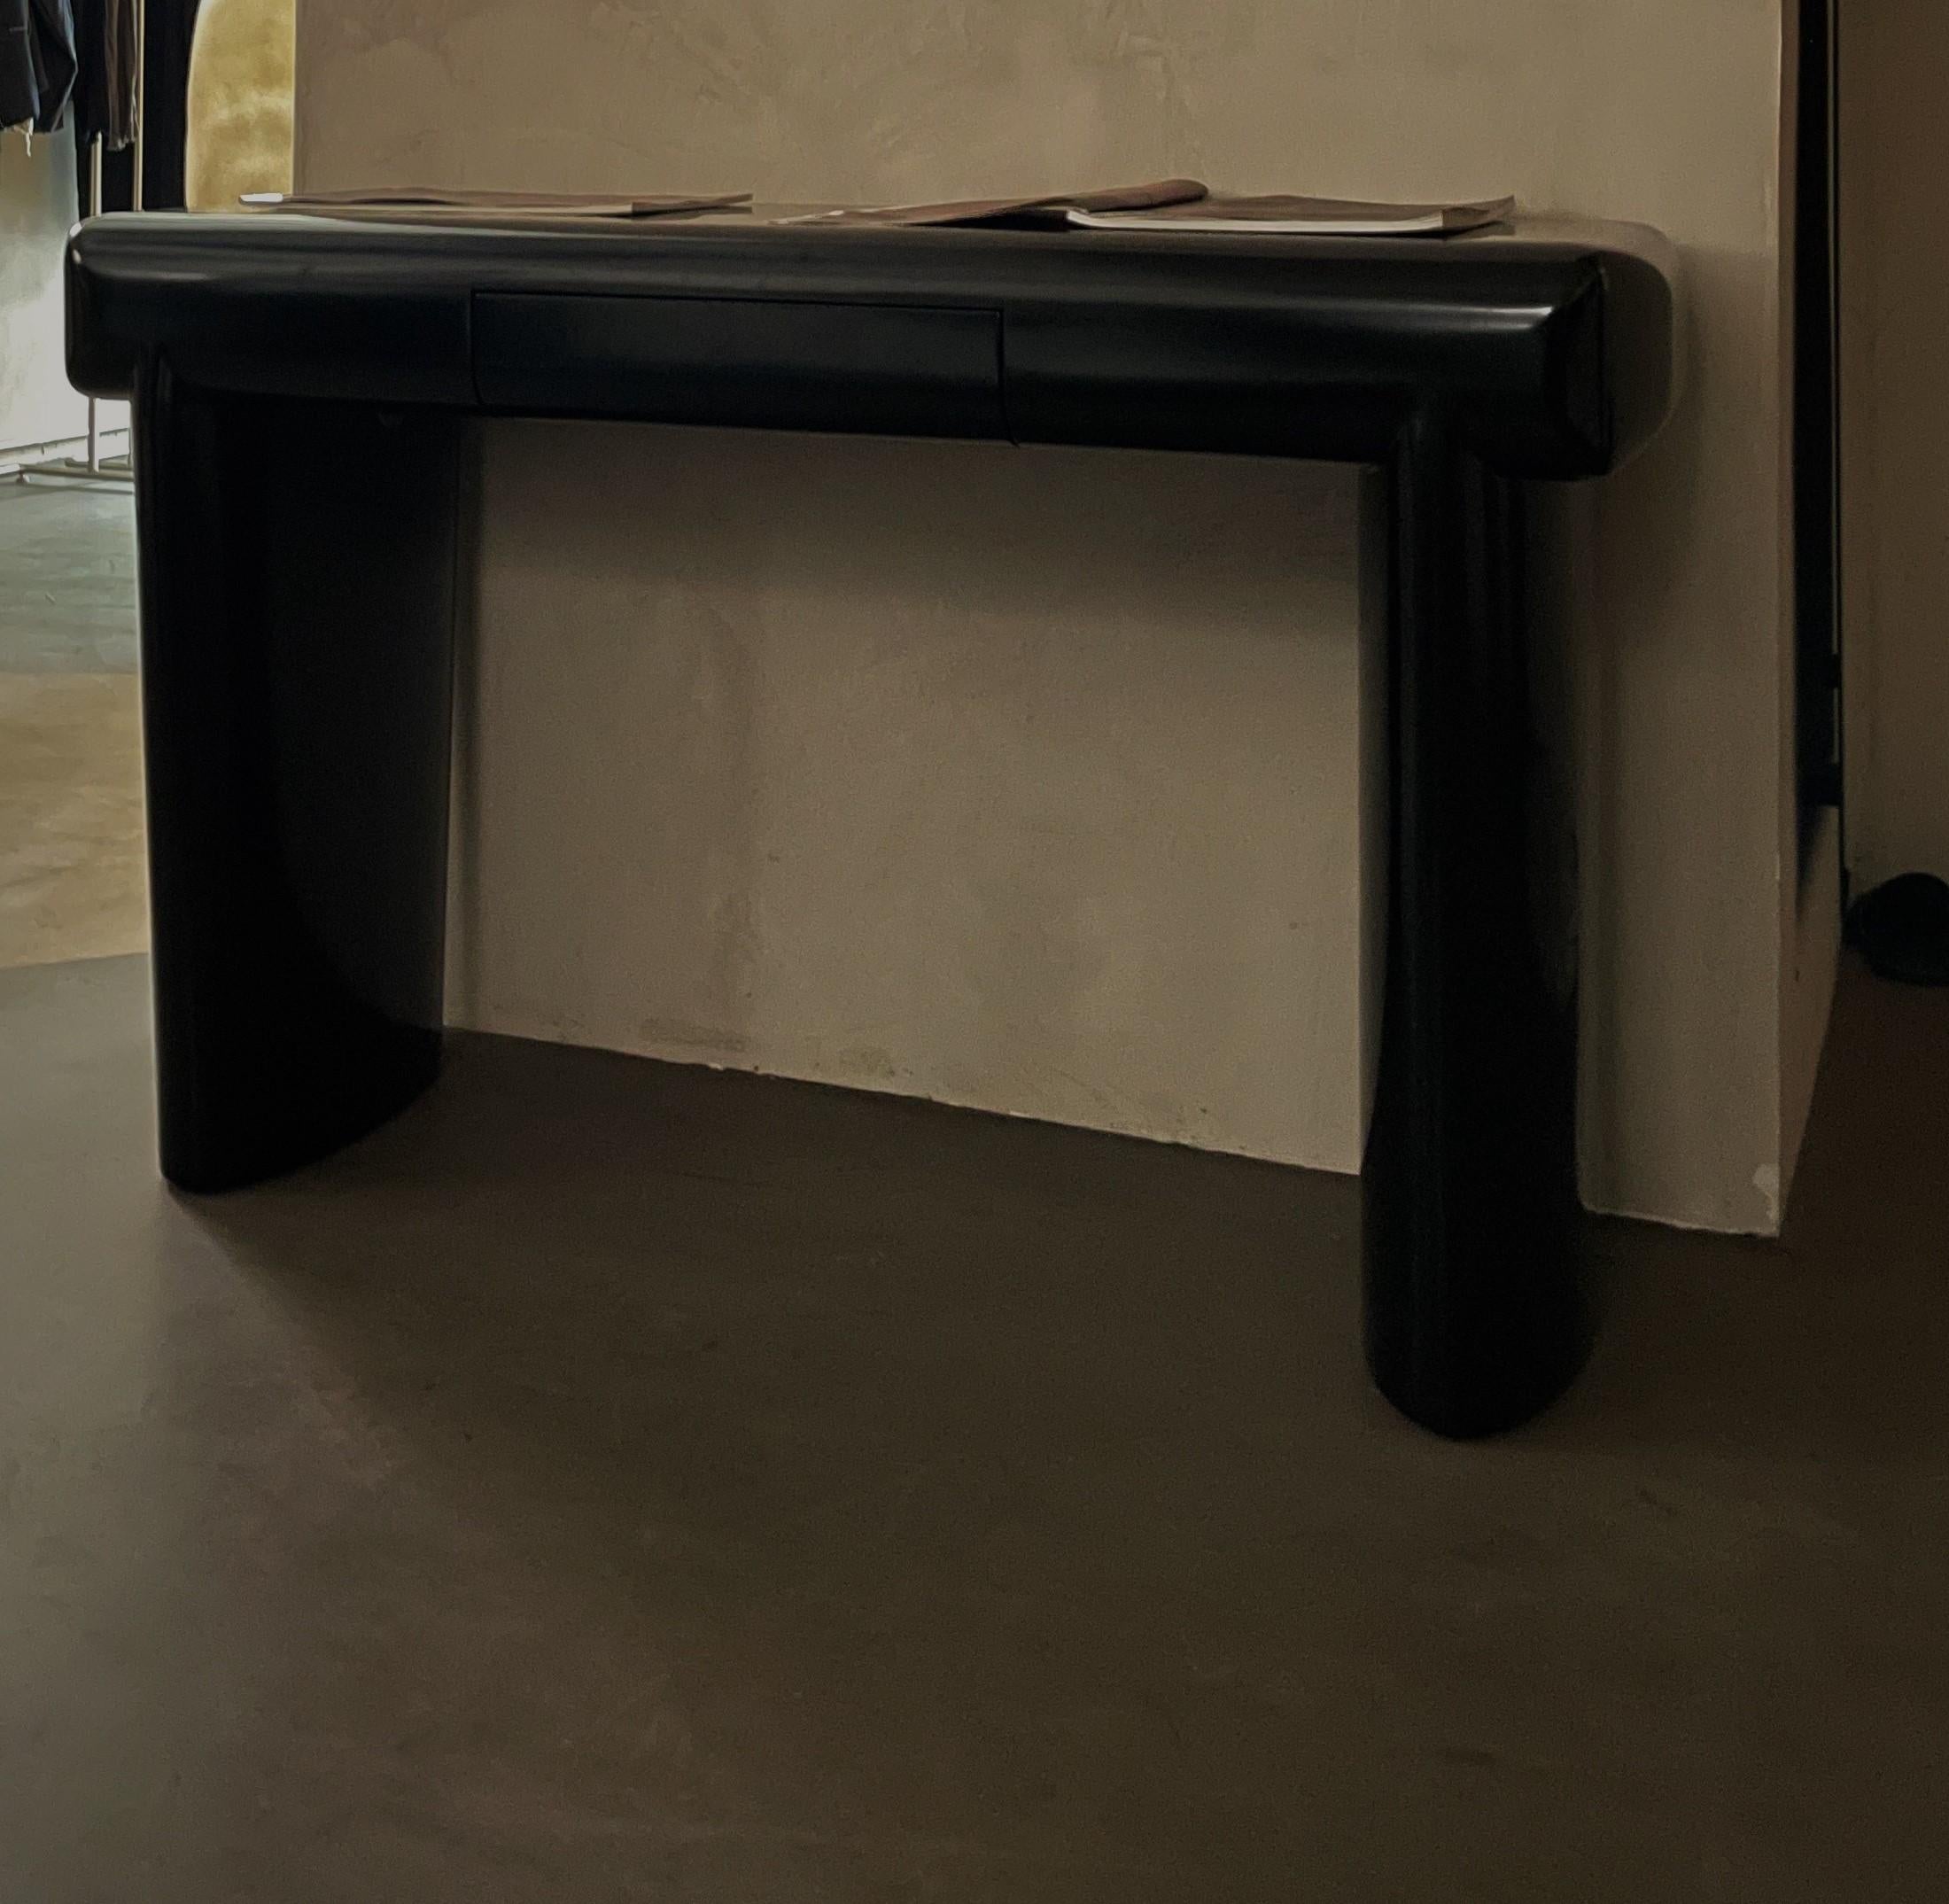 Lifting desk by kar
Dimensions: W 120 x D 45 x H 75 cm
Materials: MDF Frame
Available in black.

Kar, is the root of Sanskrit Karma, meaning karmic repetition. We seek the cause and effect in aesthetics, inspired from the past, the present, and the